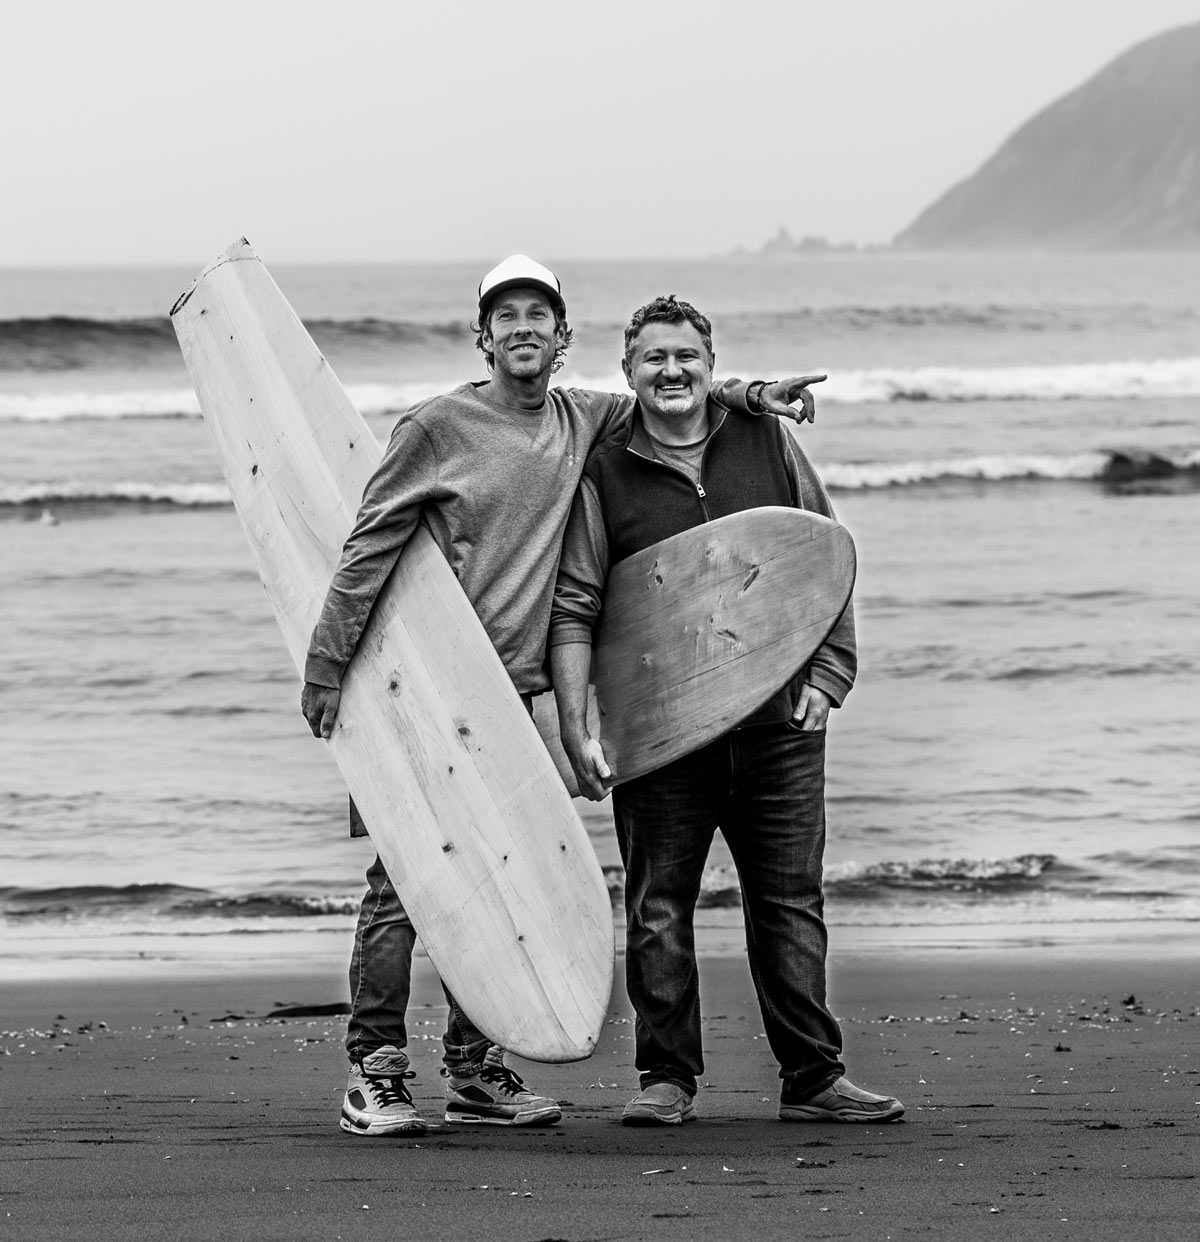 Juan José (Juanjo) Alonso and T. J. Robinson Holding Surf Boards in Chile